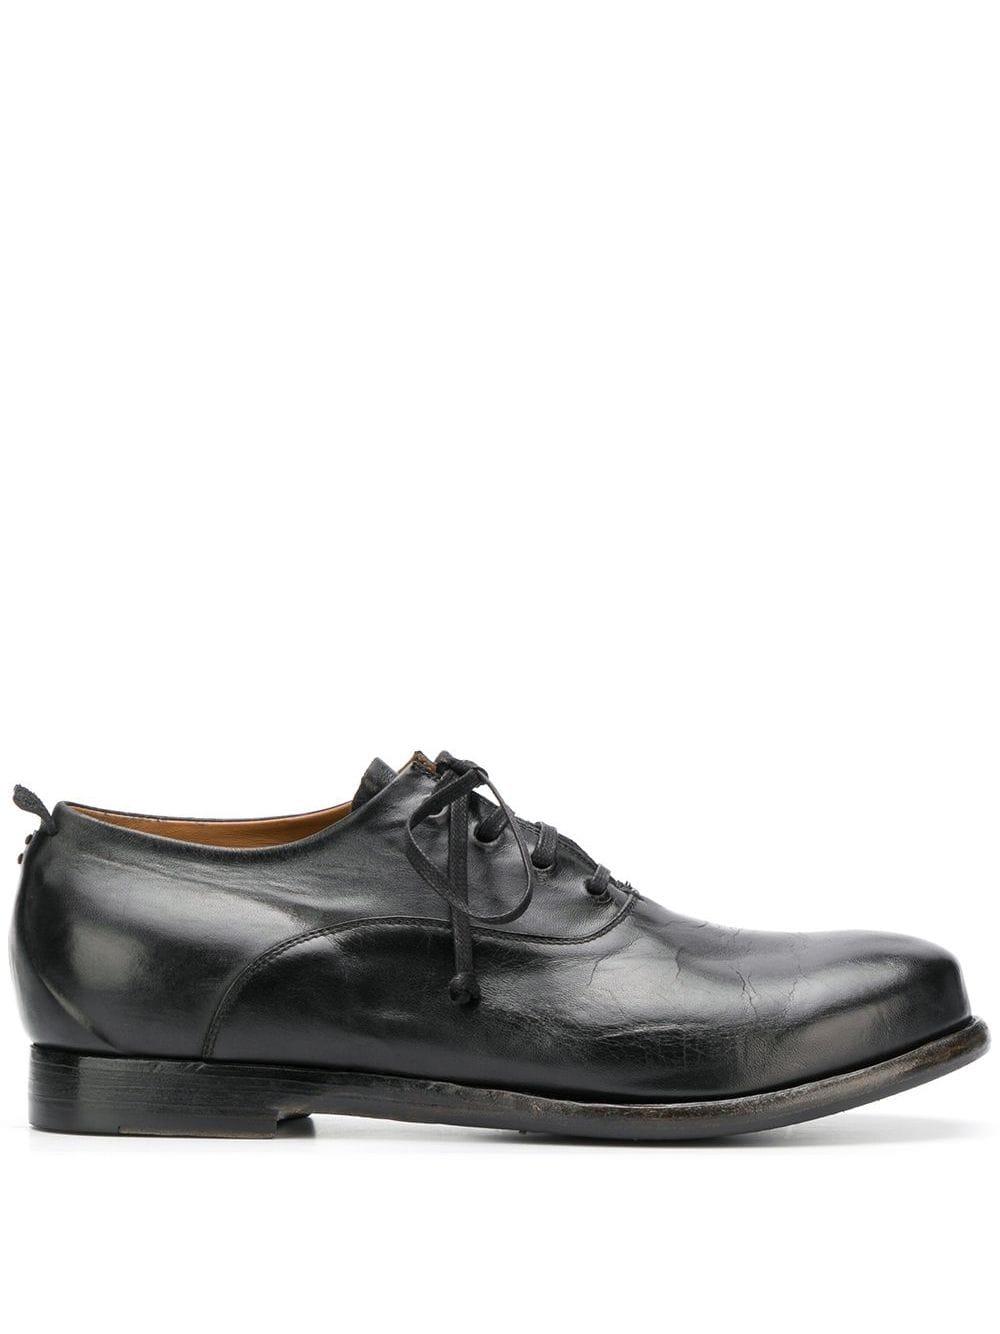 Silvano Sassetti Distressed Oxford Shoes in Black for Men - Lyst